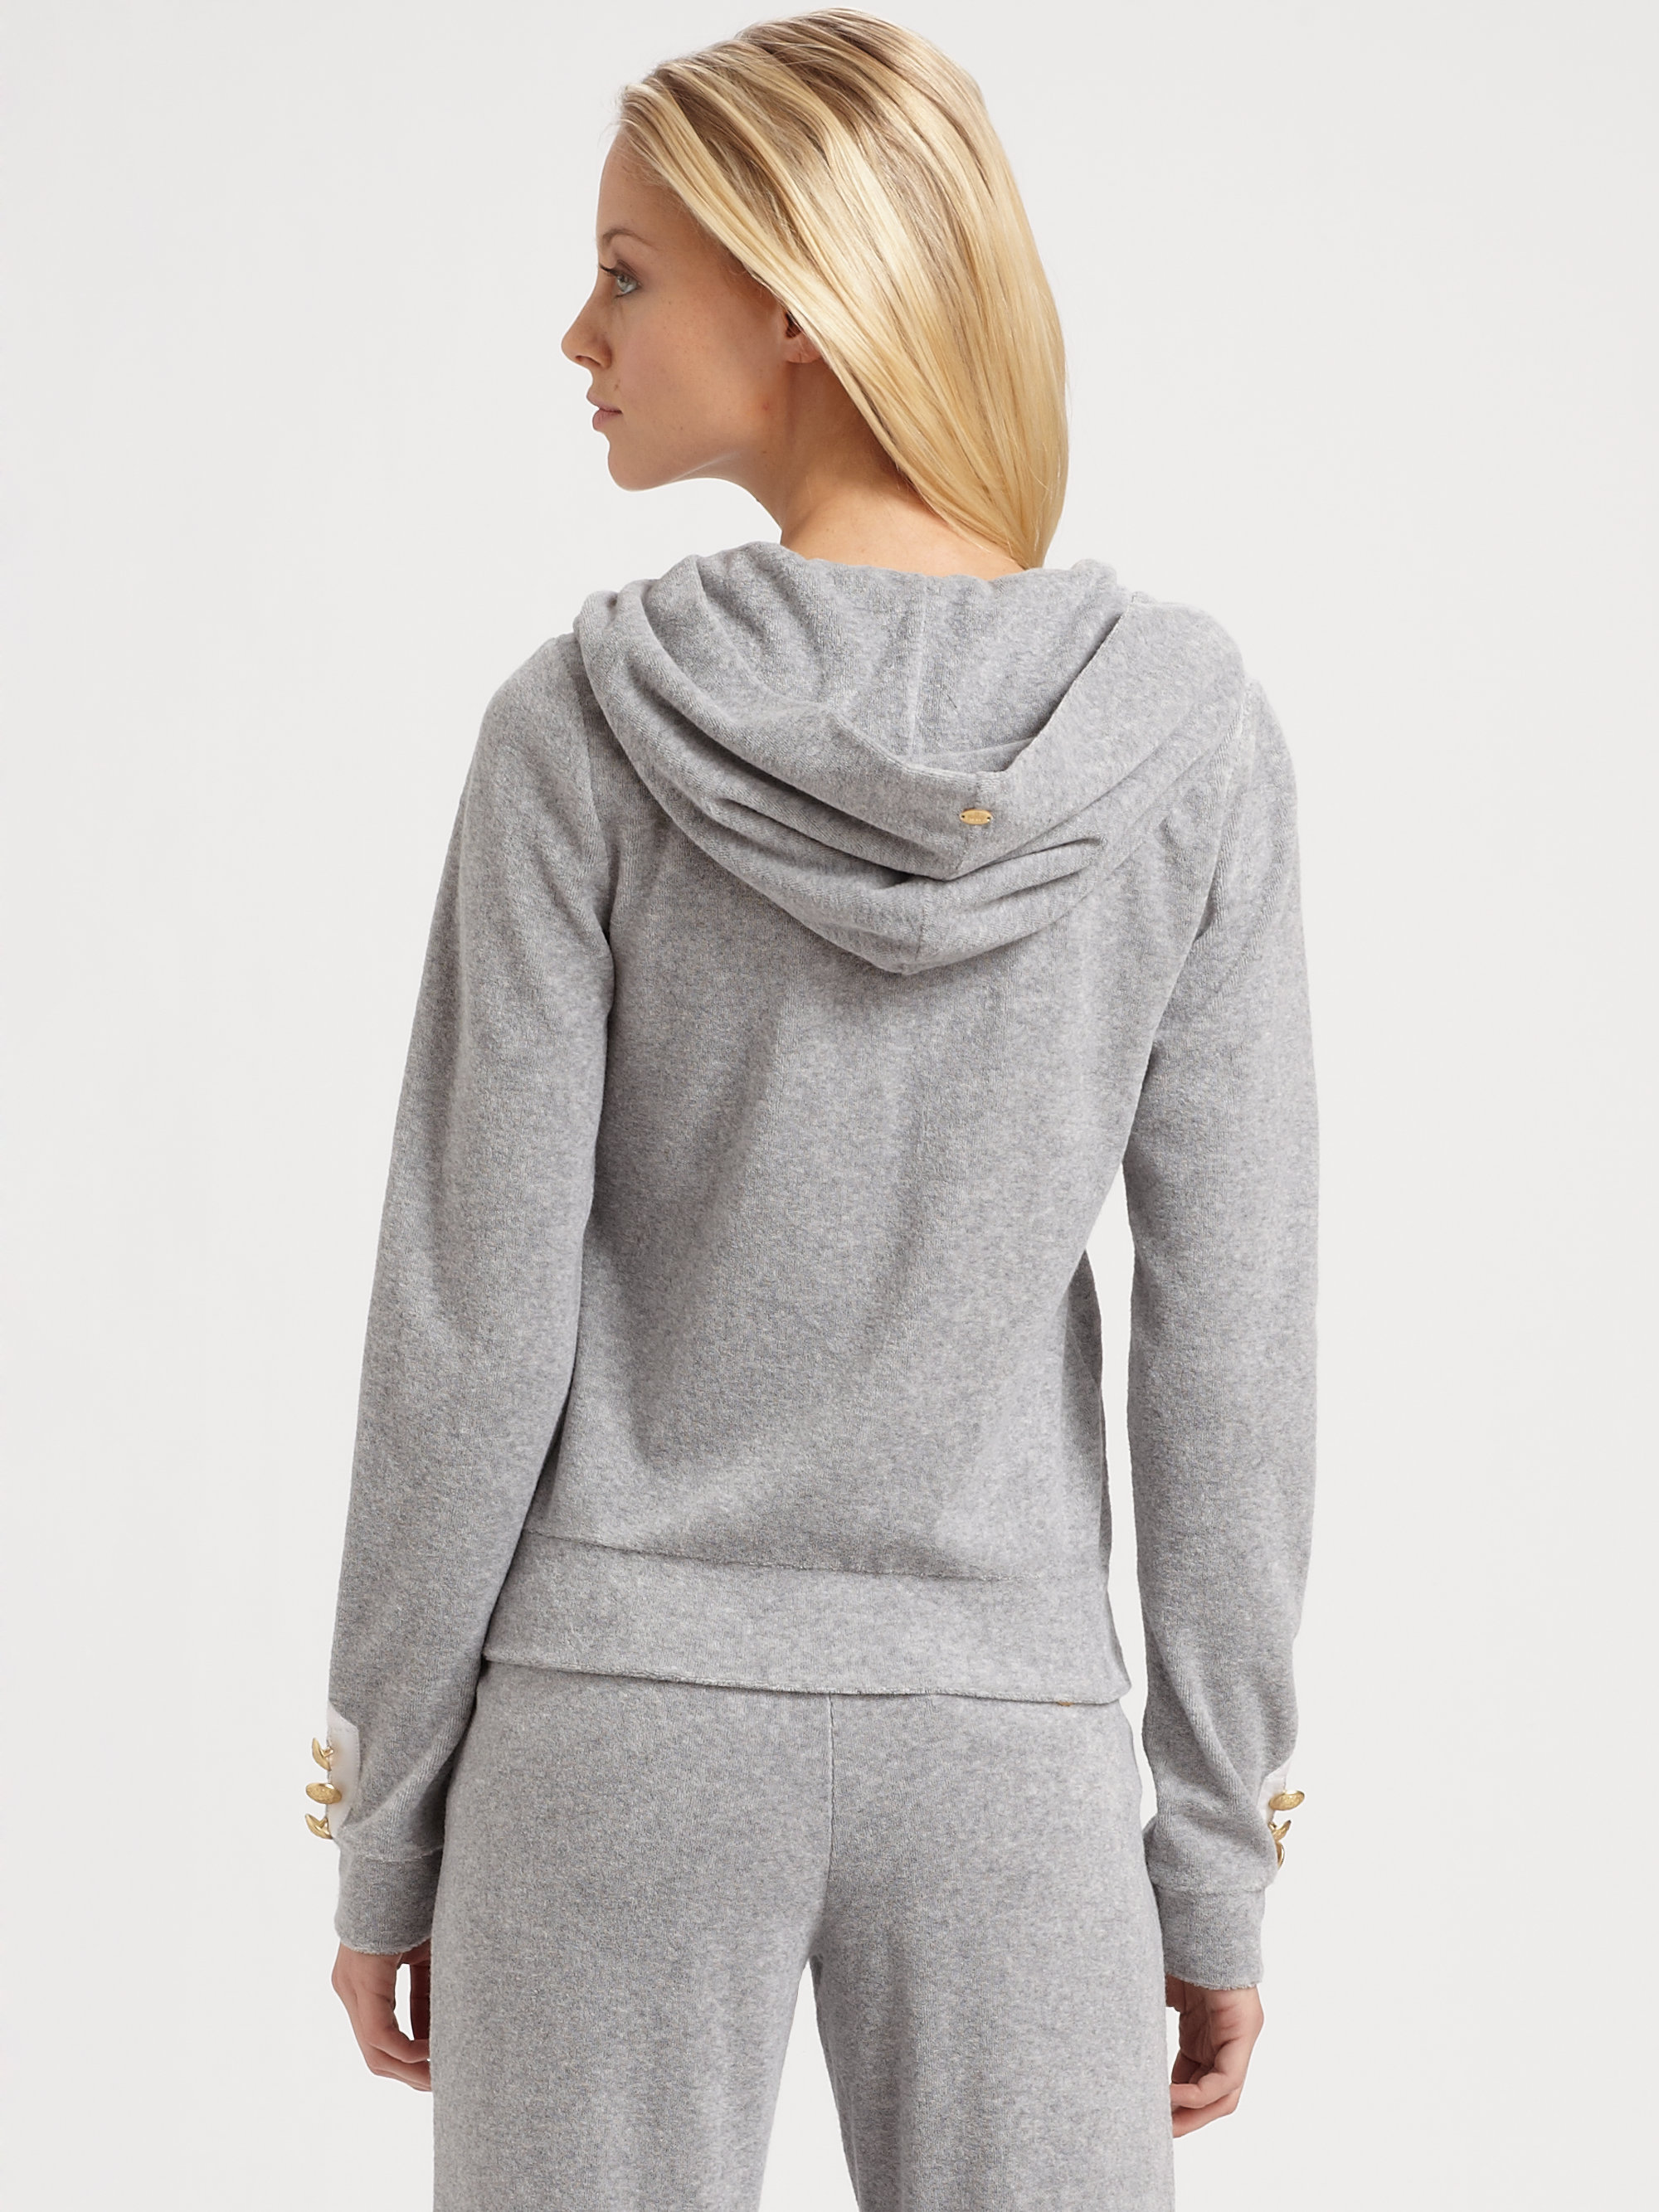 Juicy Couture Terry Knit Hoodie in Gray - Lyst